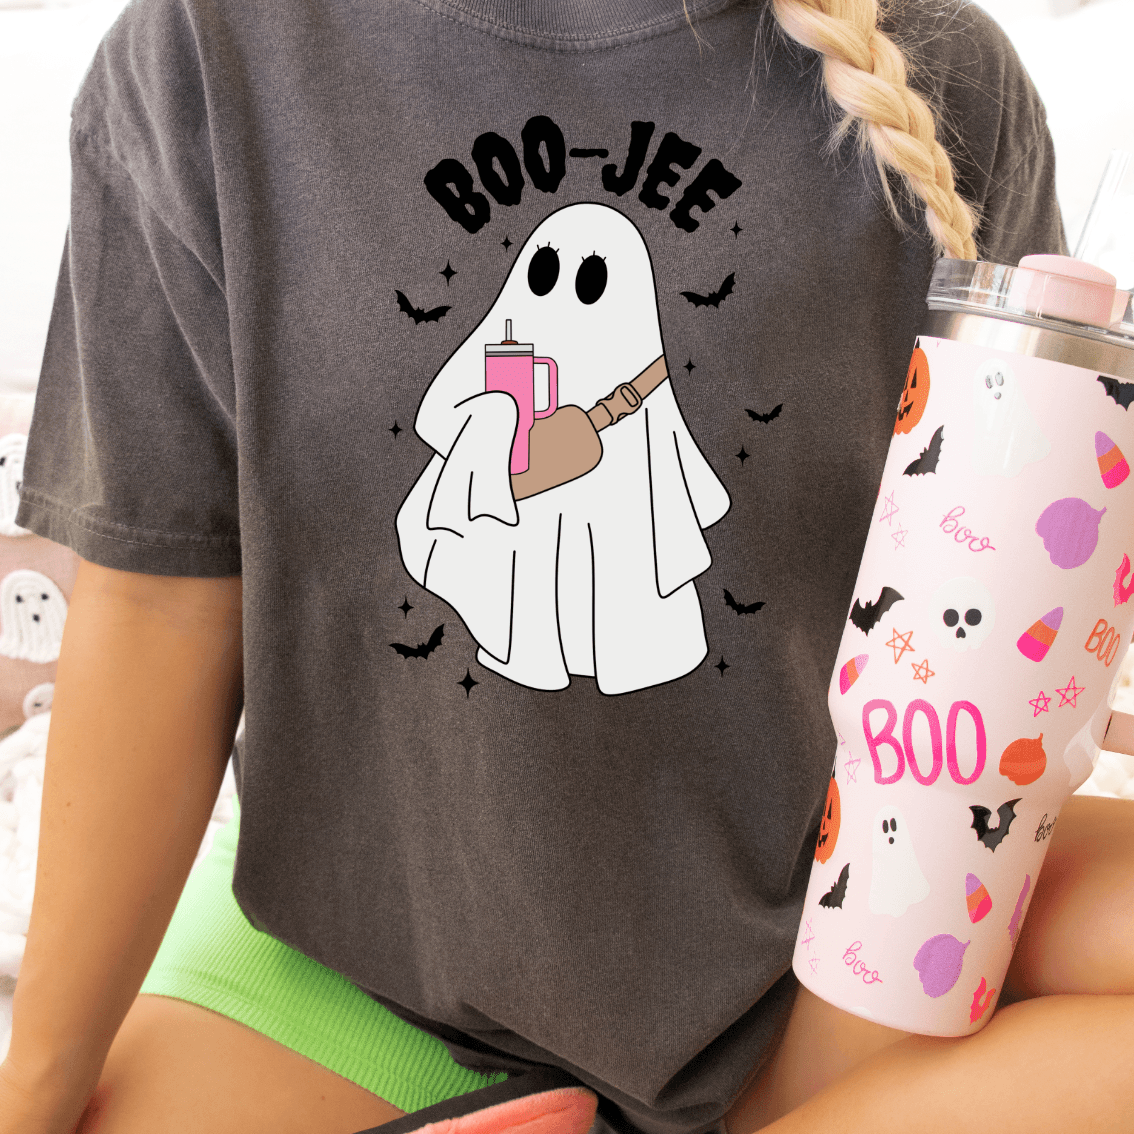 Boo-Jee - Signastyle Boutique